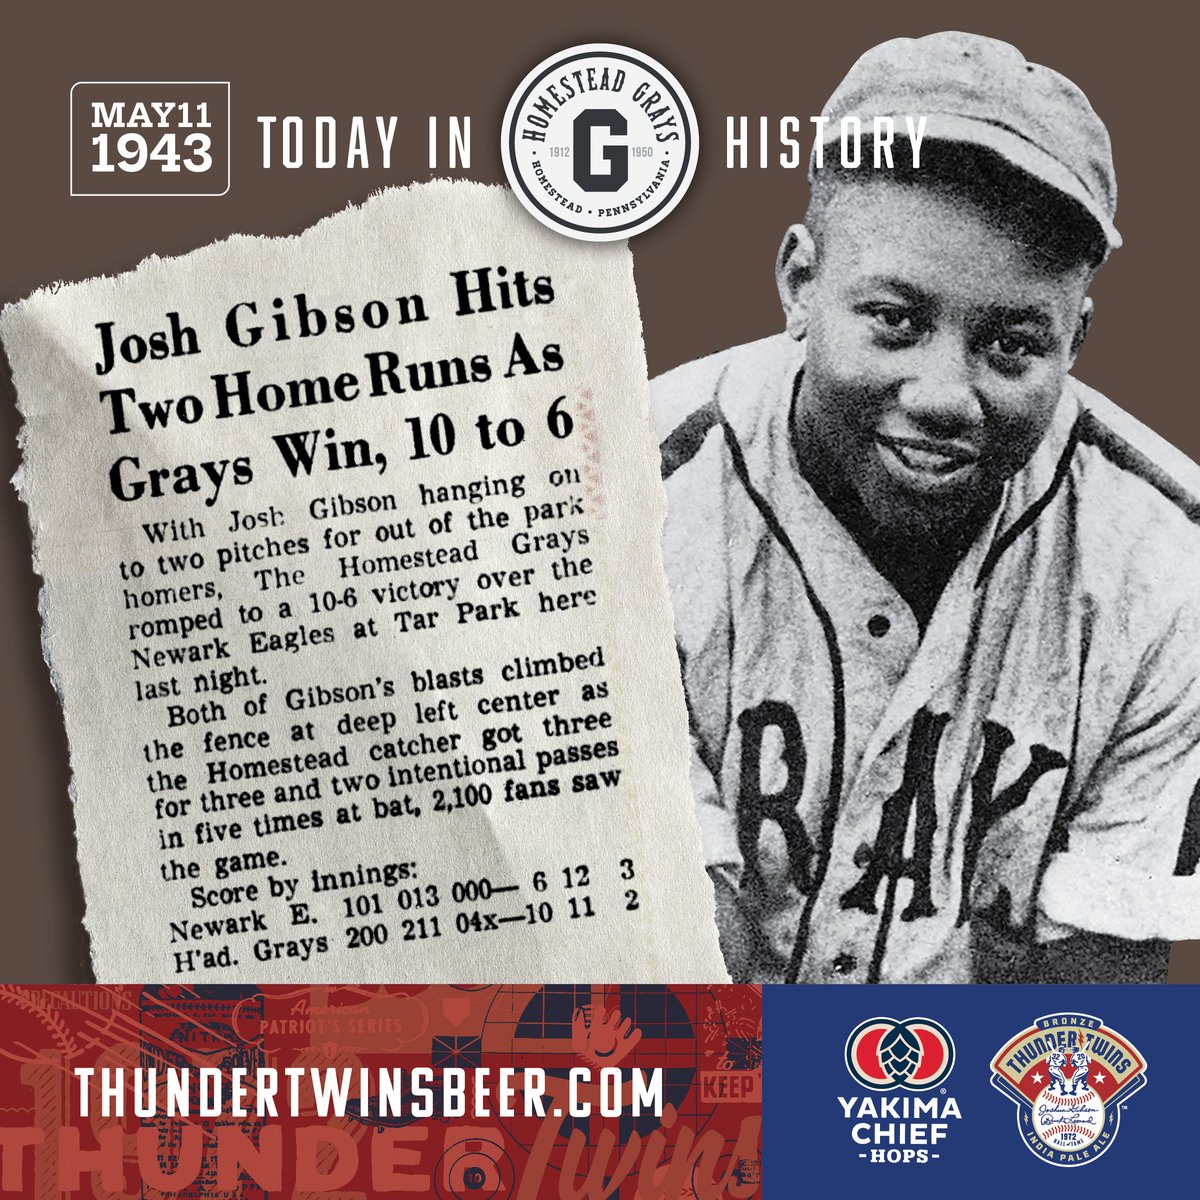 #OTD #HomesteadGrays History: 5.11.43. Josh Gibsons 2 HRs help Grays to 10-6 win vs #Newark. A final tune-up before Josh and Buck Leonard led the Grays to 1st of back-to-back #NegroLeagues #WorldSeries championships. #thundertwinsbeer #IPA @YakimaChief